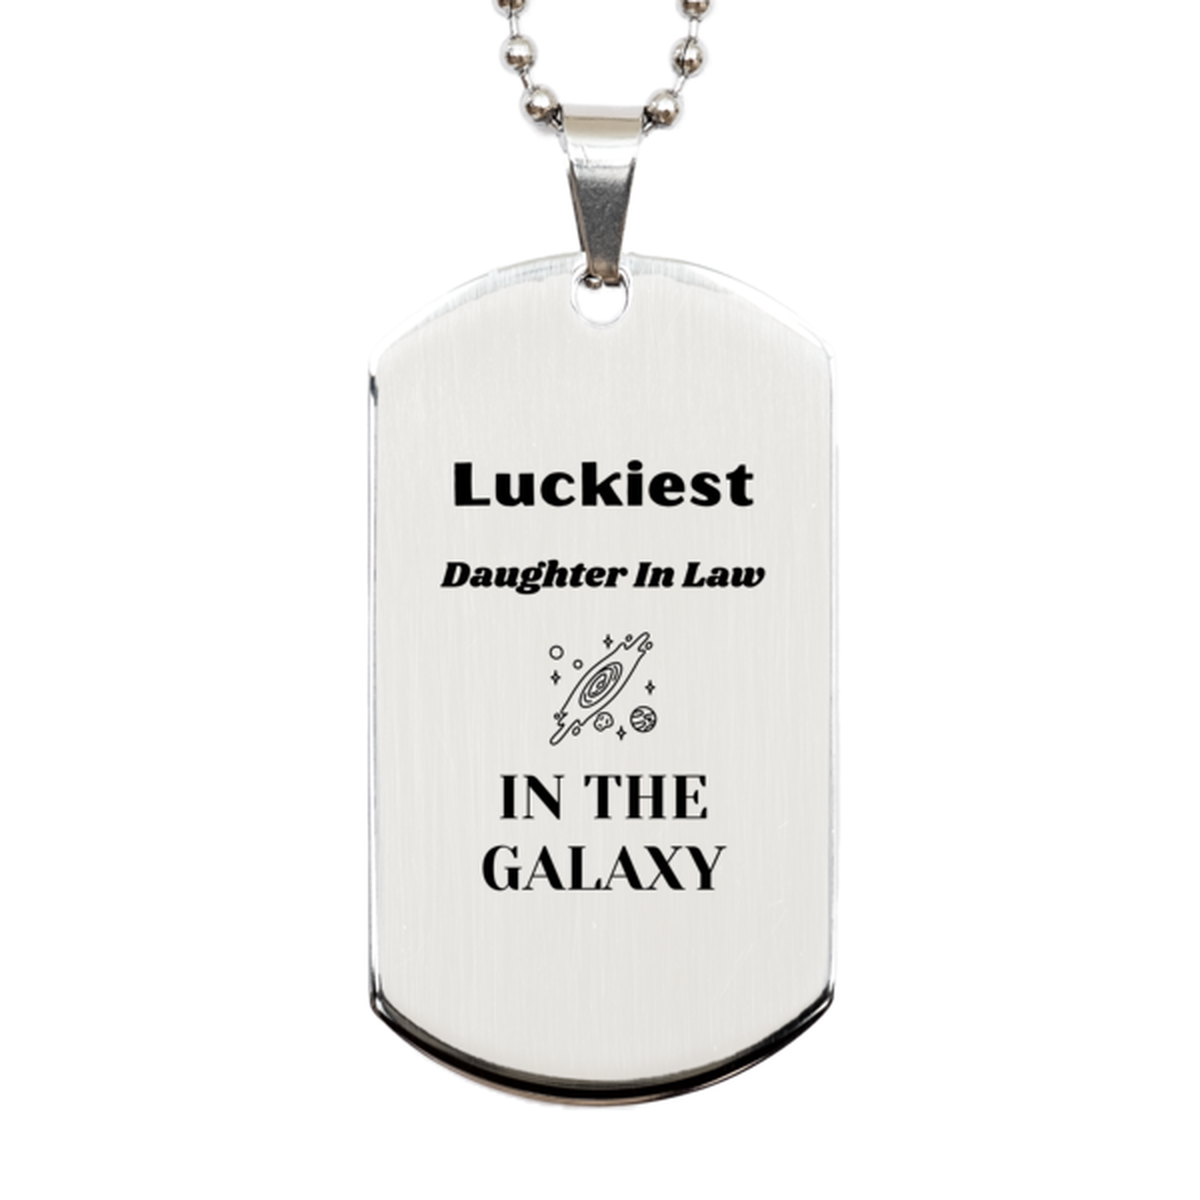 Luckiest Daughter In Law in the Galaxy, To My Daughter In Law Engraved Gifts, Christmas Daughter In Law Silver Dog Tag Gifts, X-mas Birthday Unique Gifts For Daughter In Law Men Women